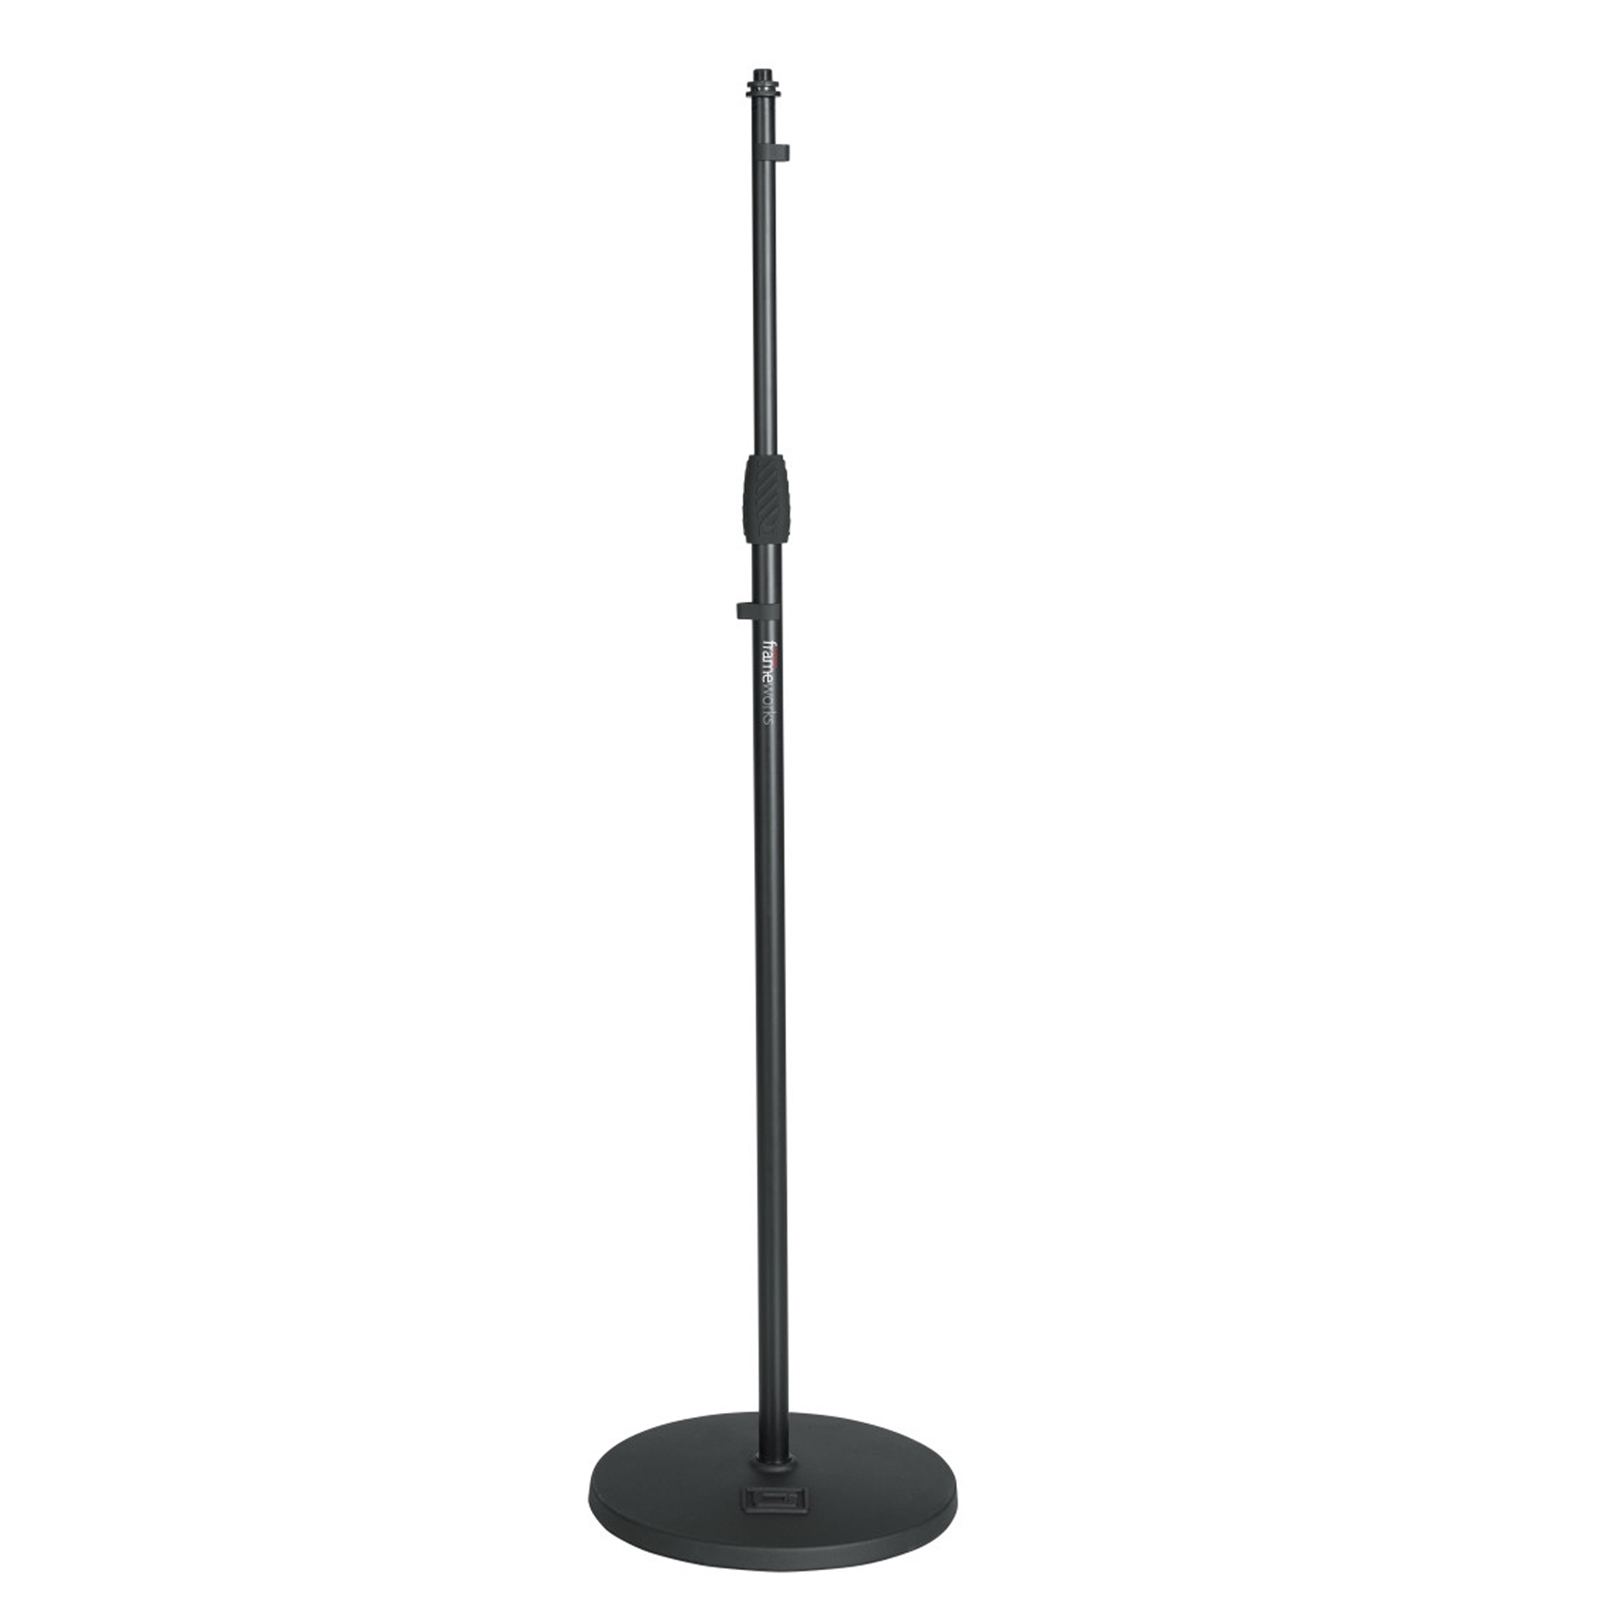 Gator Frameworks Standard Microphone Stand with 12" Round Base